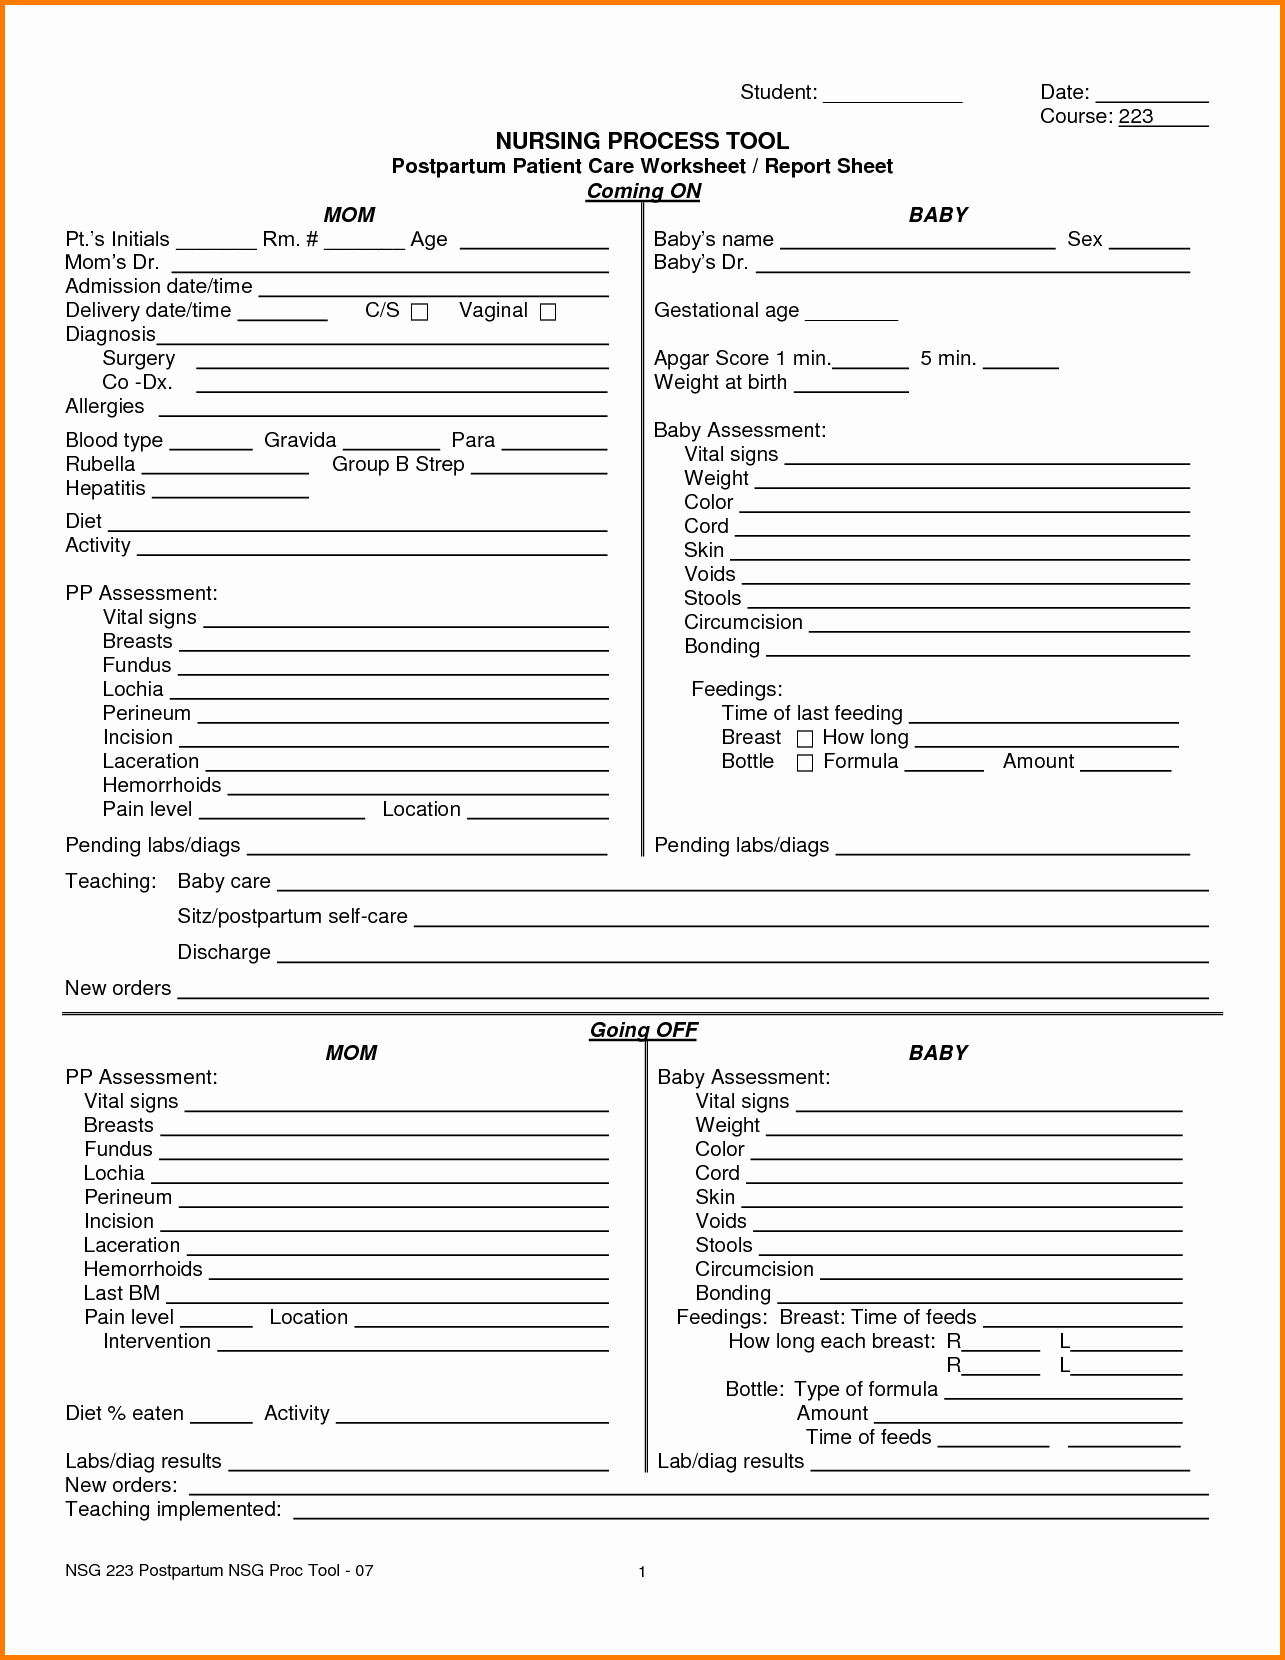 Printable Nurse Report Sheets That Are Critical | Darryl's Blog For Nurse Report Sheet Templates